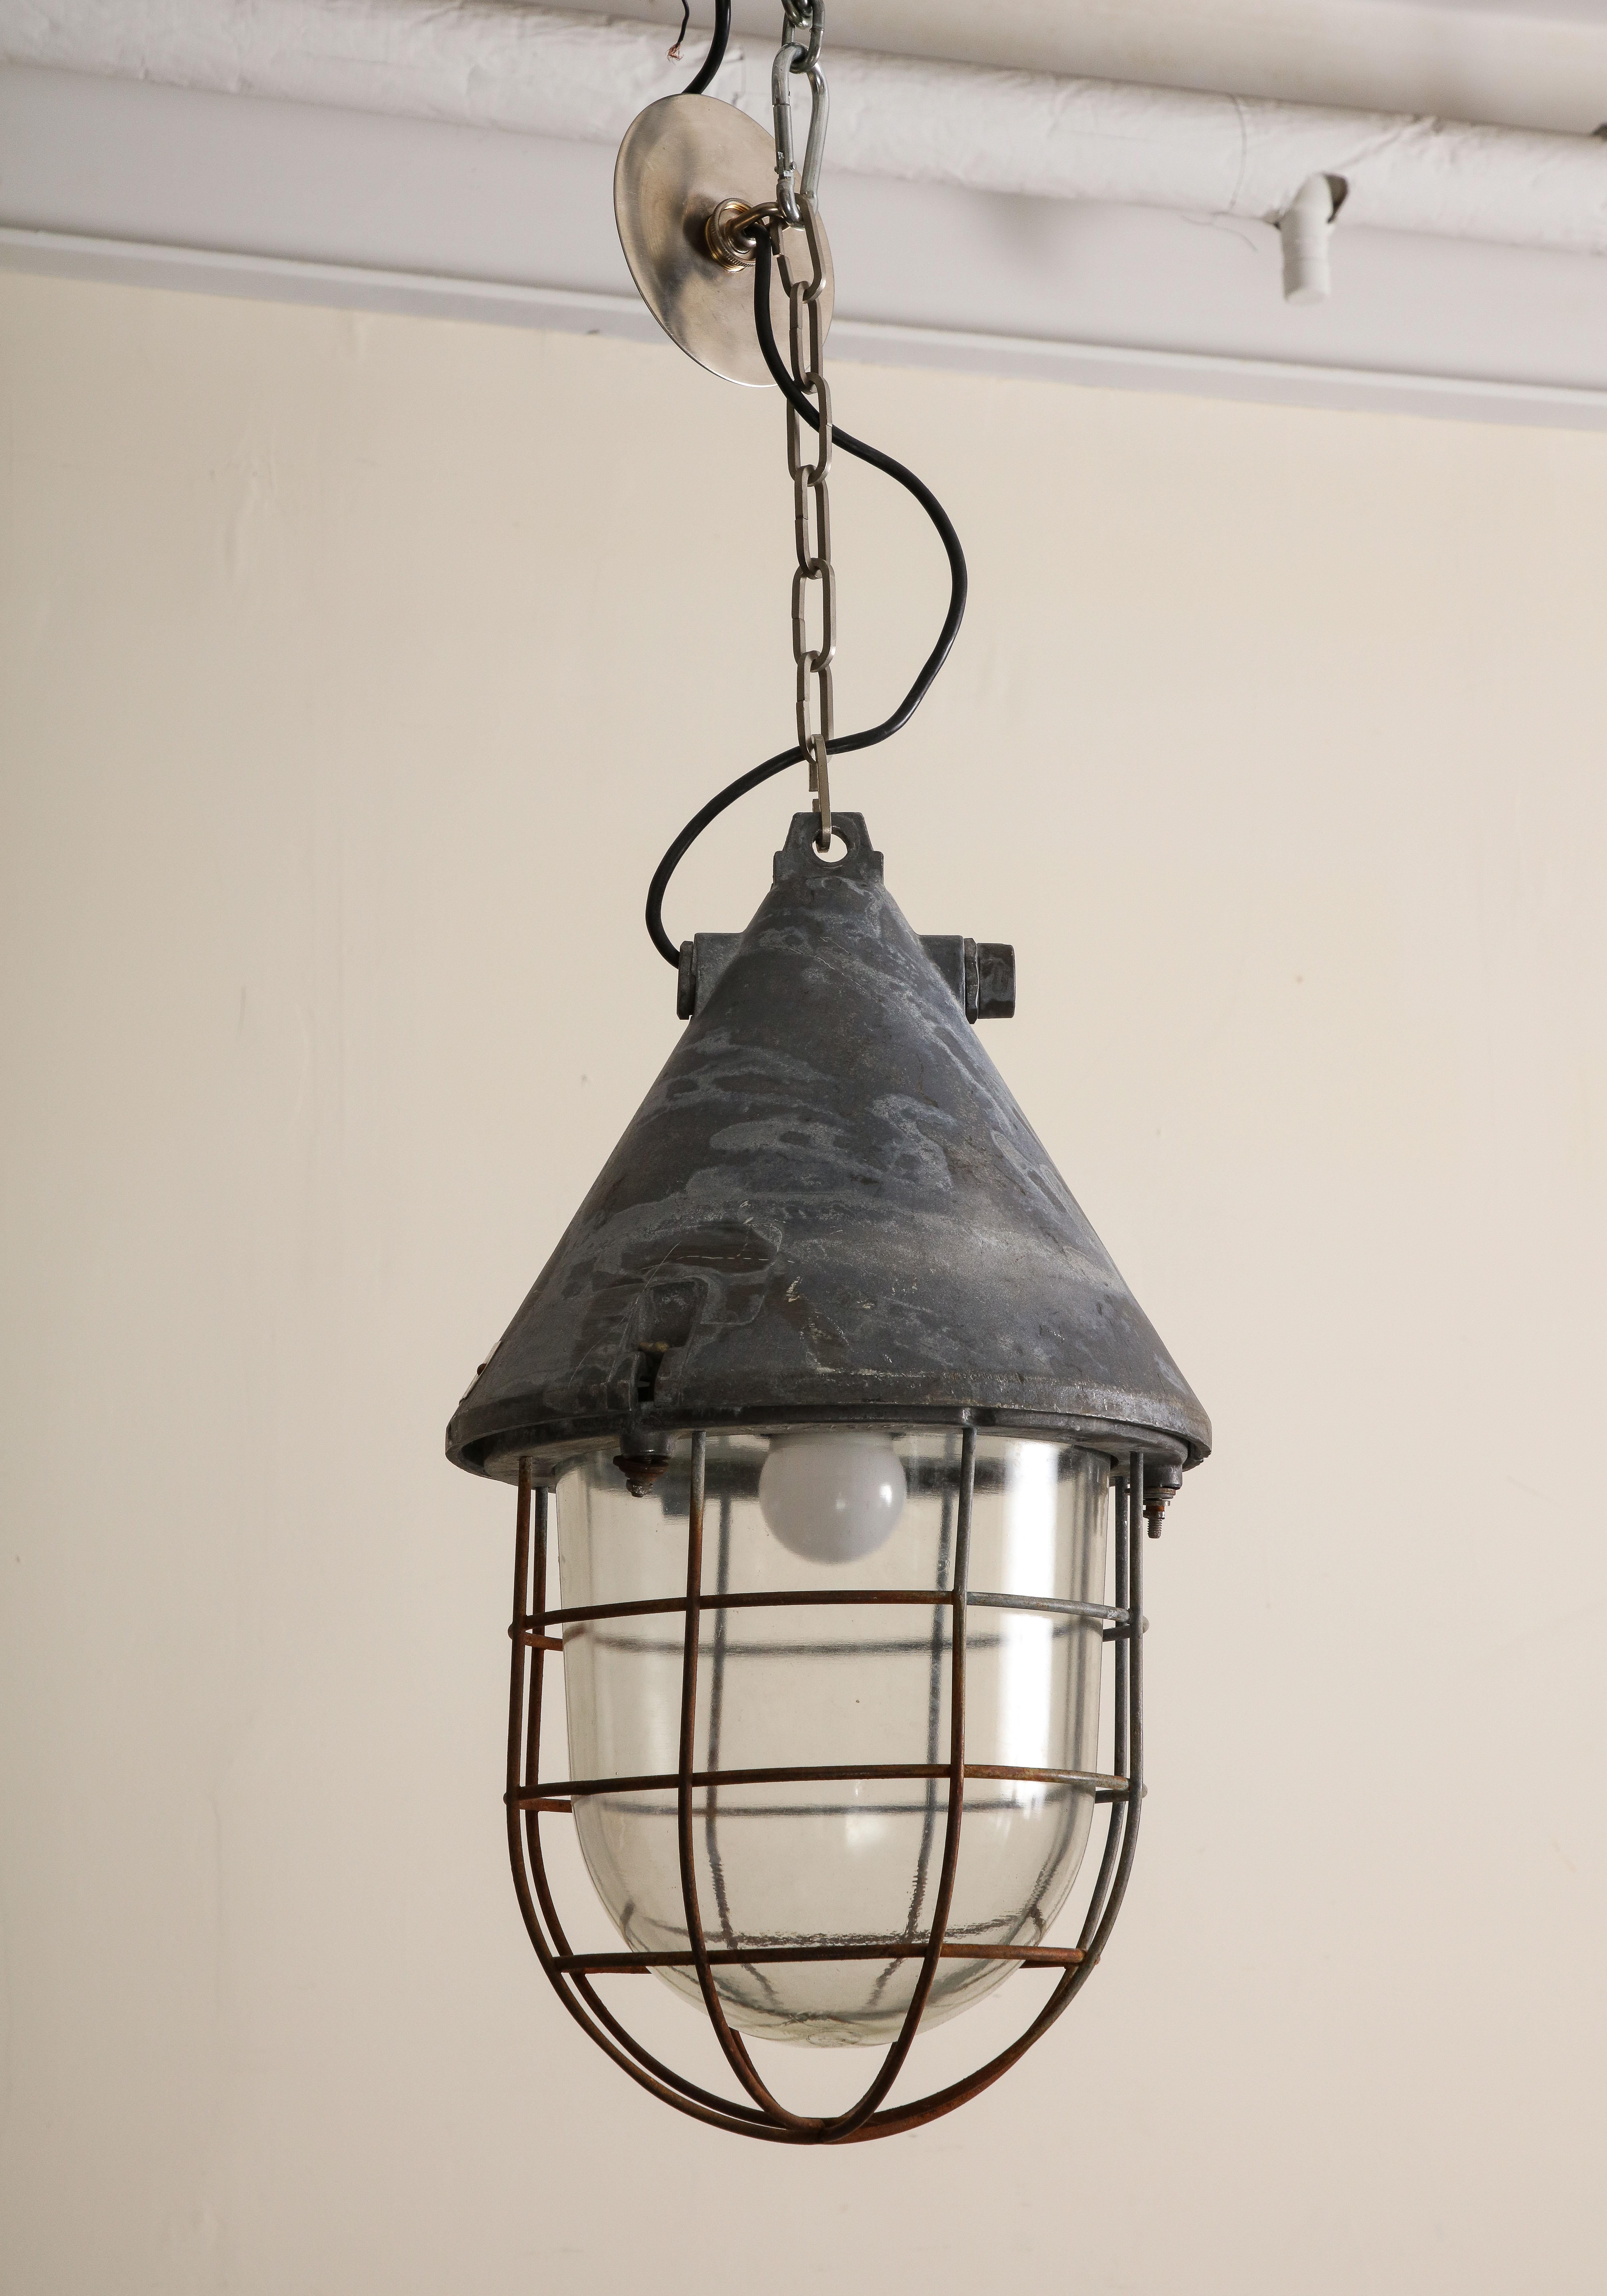 Pair of Vintage Industrial Cast Iron Cage Pendant Lights, C. 1920 For Sale 1